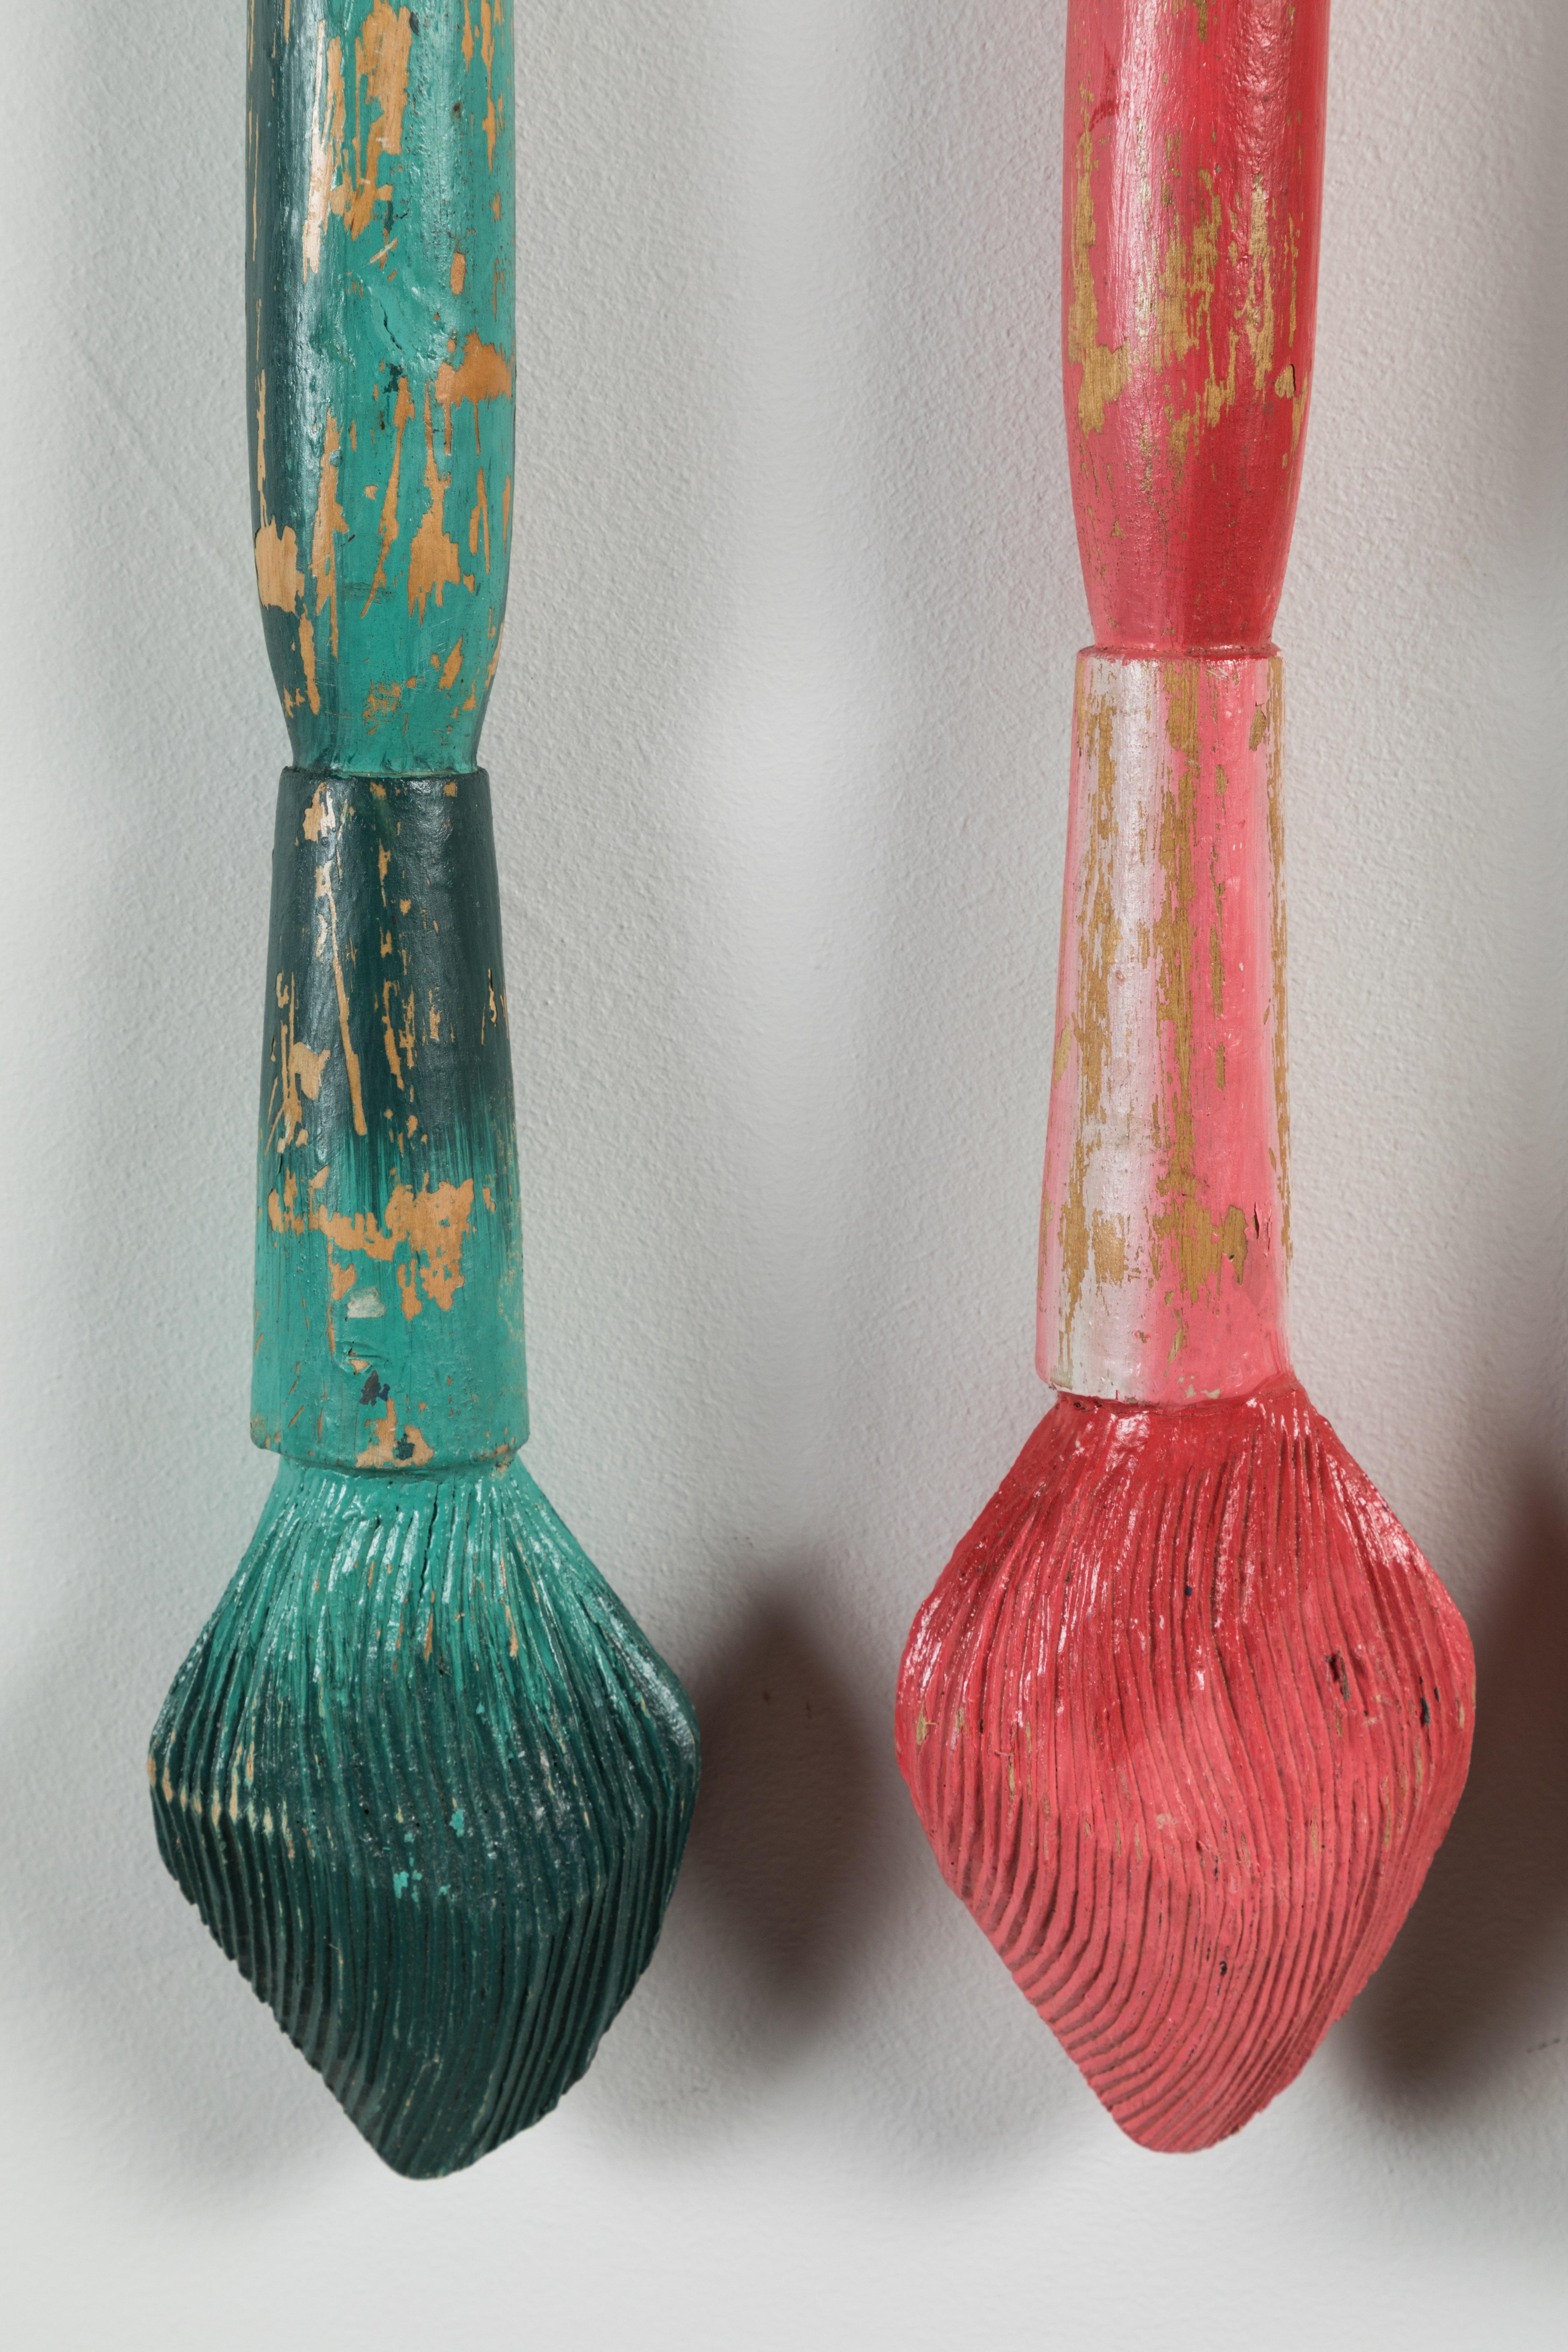 Fantastic hand carved giant wood artist paintbrushes. All original multi colored paint surface. Completely wood carved. Perhaps part of a retail window display or a trade sign. Great American Folk Art. Includes four carved paint brushes and custom